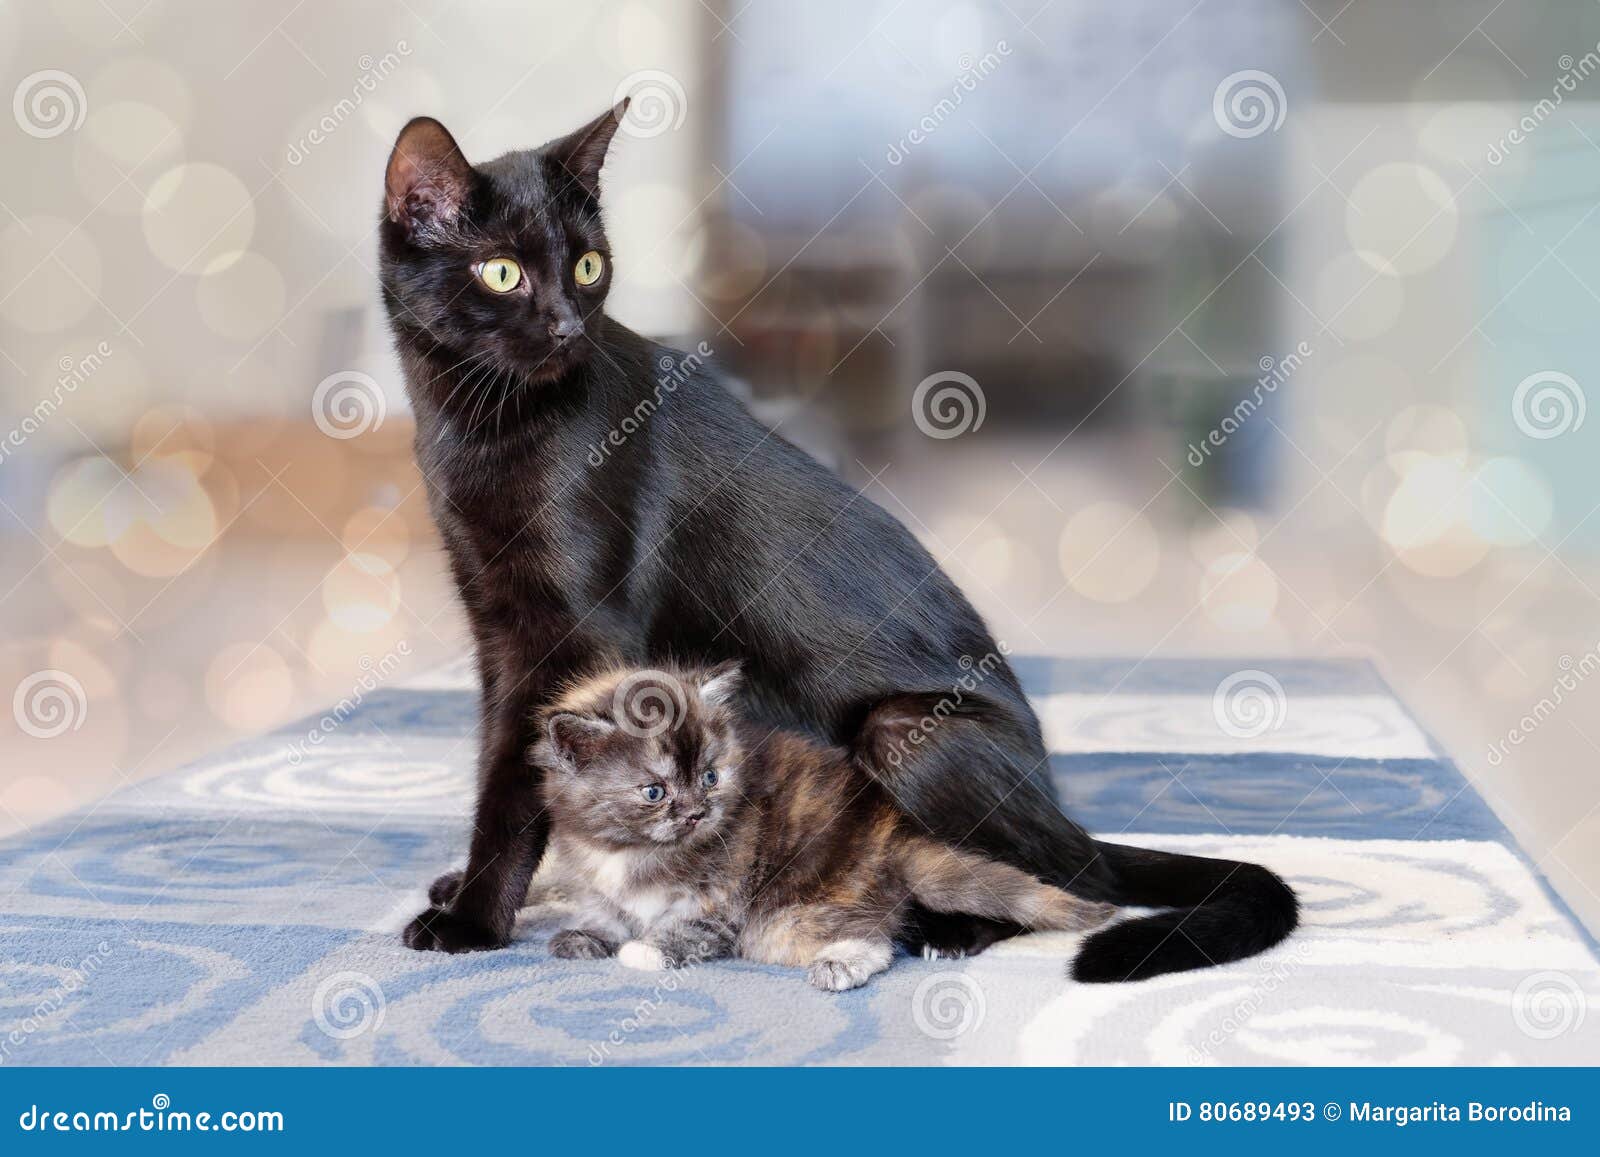 521,547 Cute Cat Kitten Stock Photos - Free & Royalty-Free Stock Photos  from Dreamstime